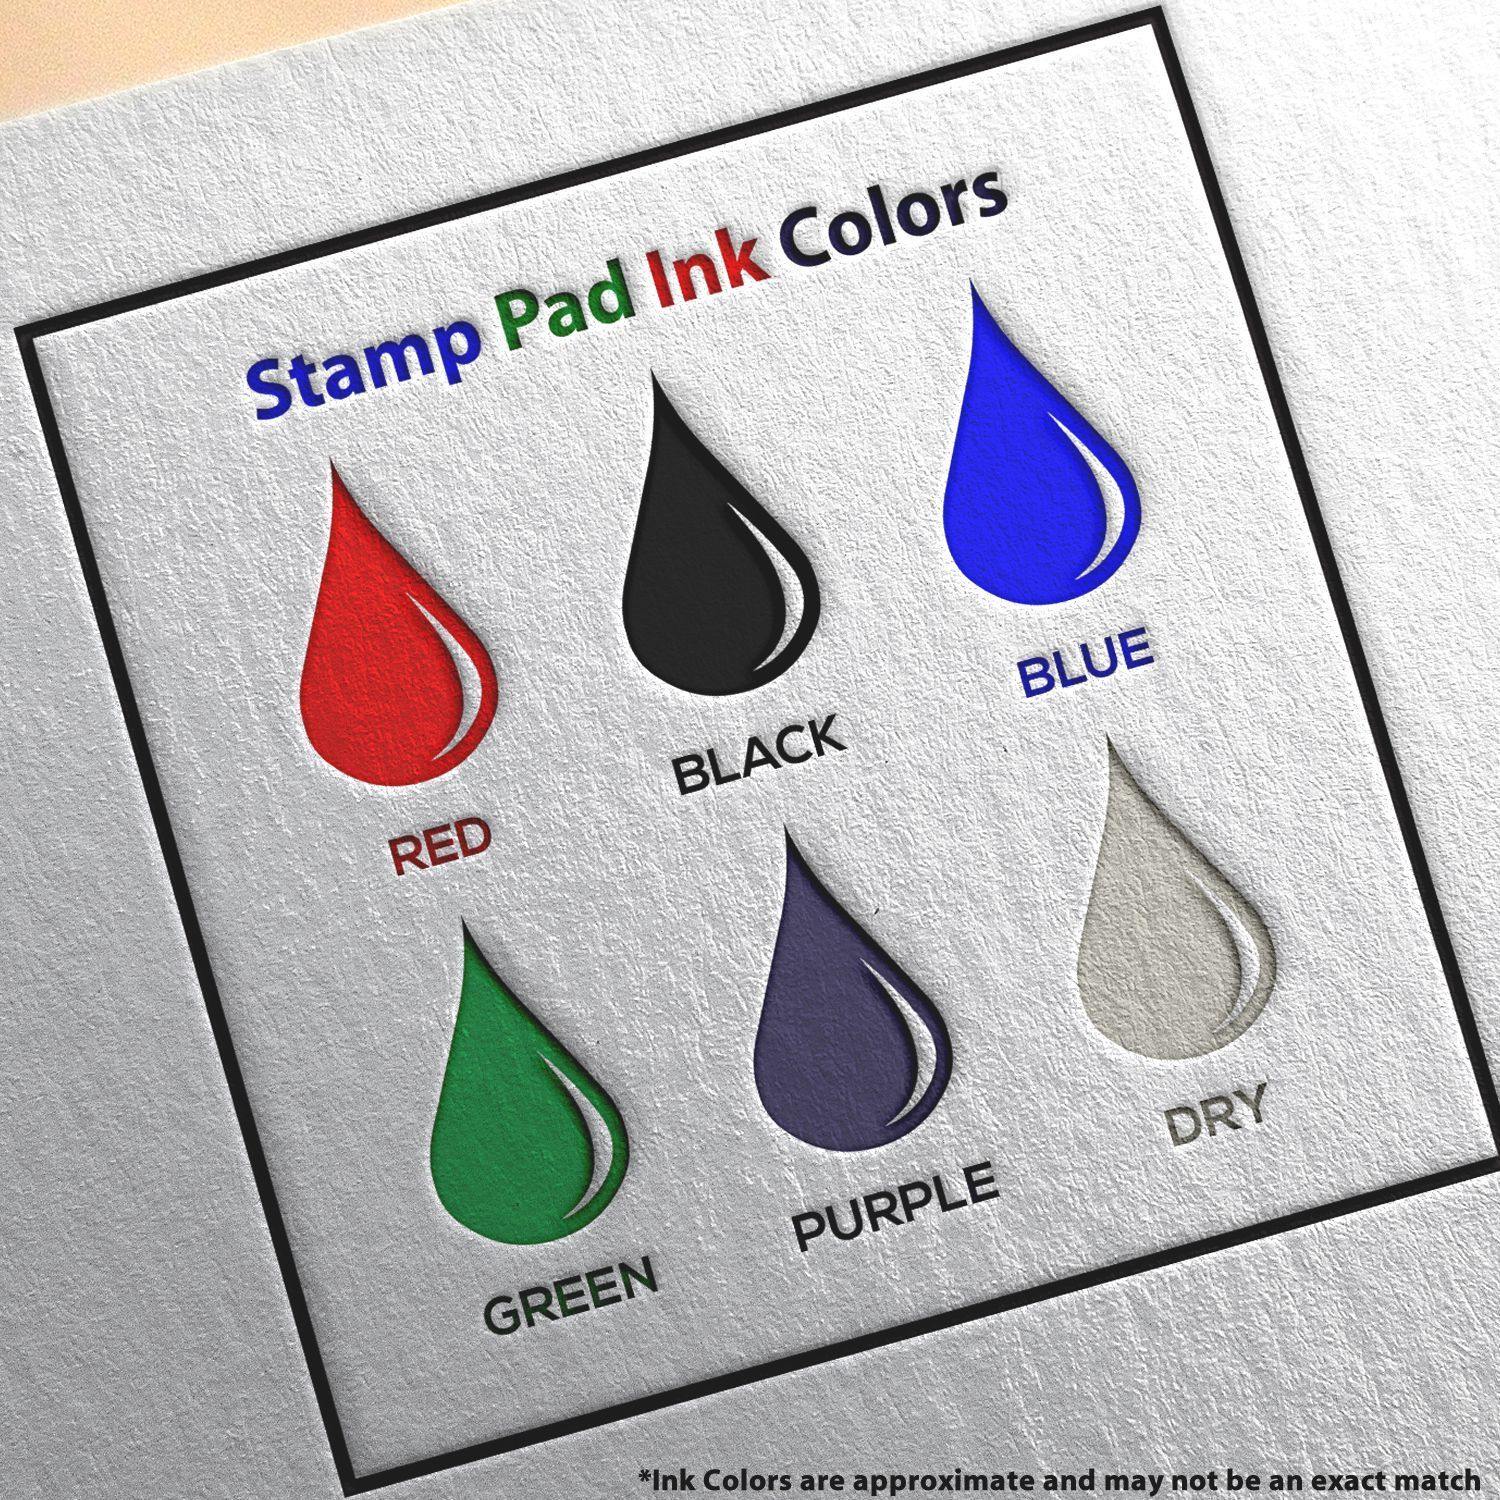 Stamp Ink for Rubber Stamps and Stamp Pads: Fast Shipping